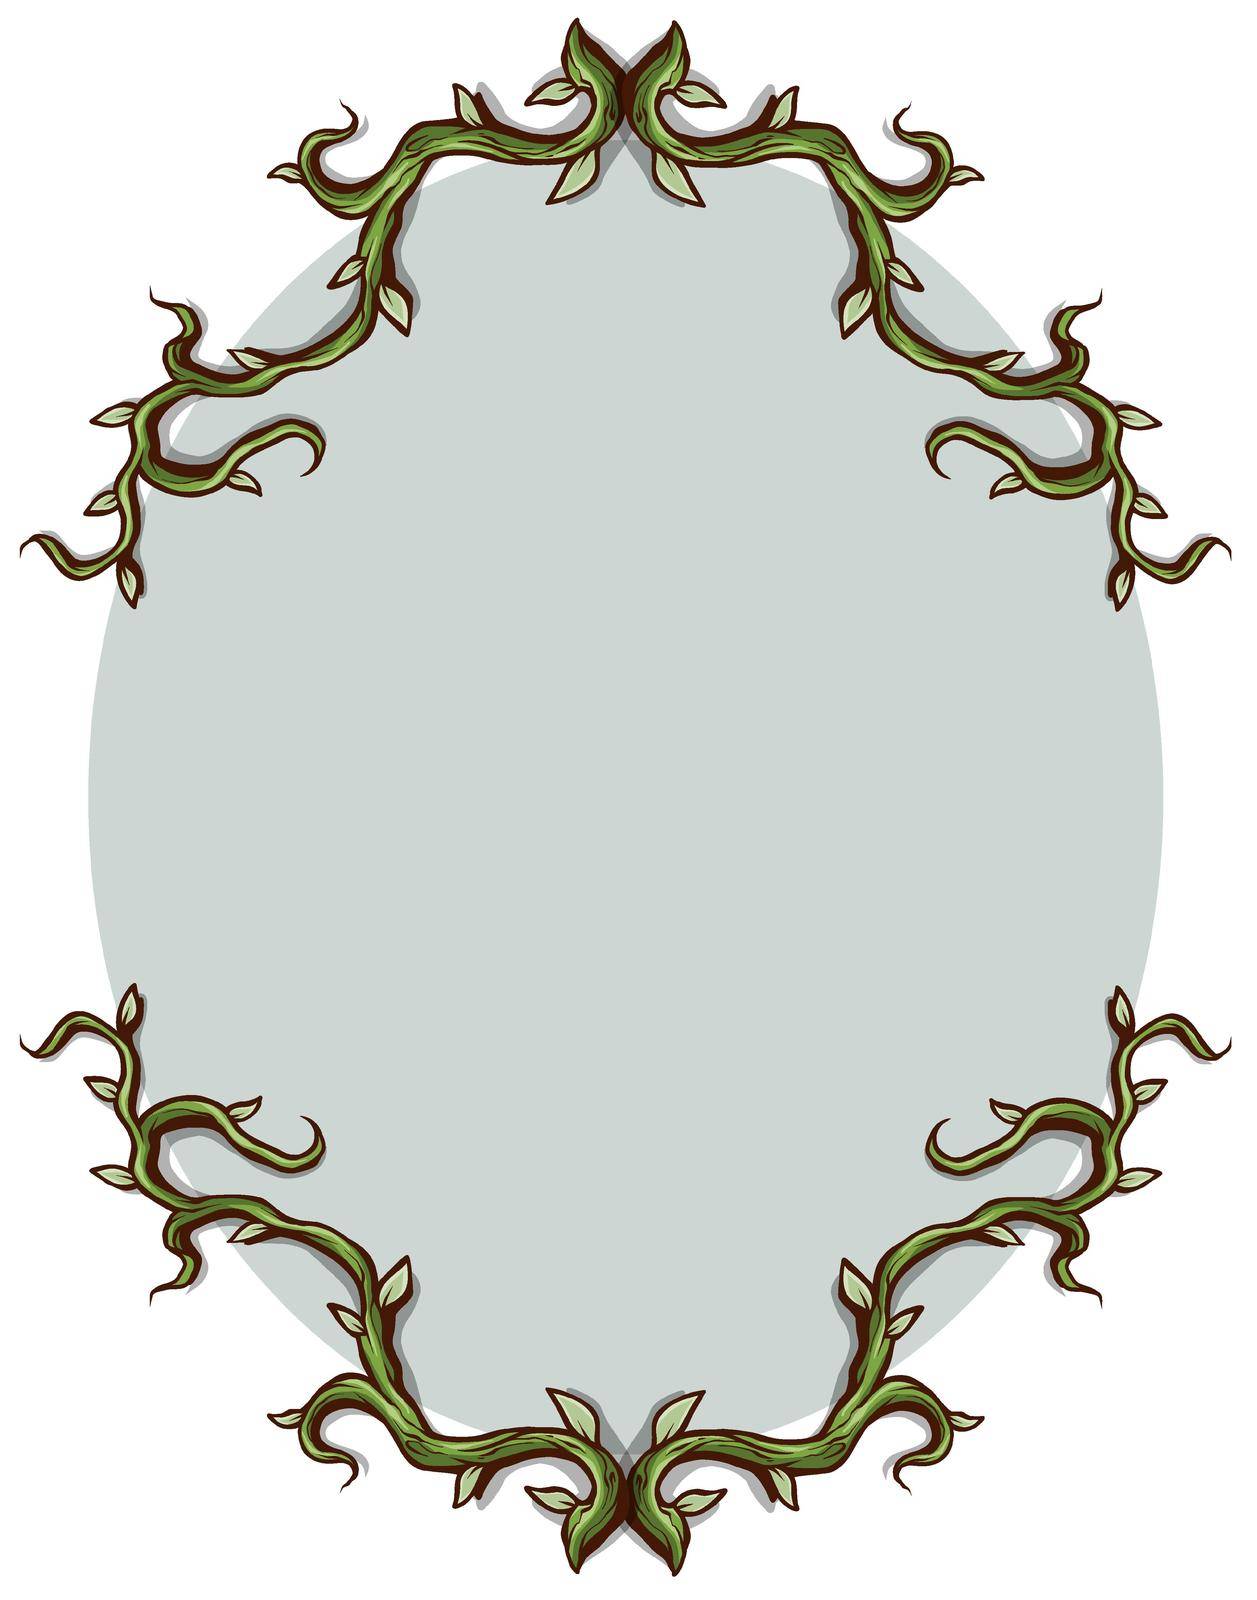 Cartoon green border frame branch with leaves by GB_Art